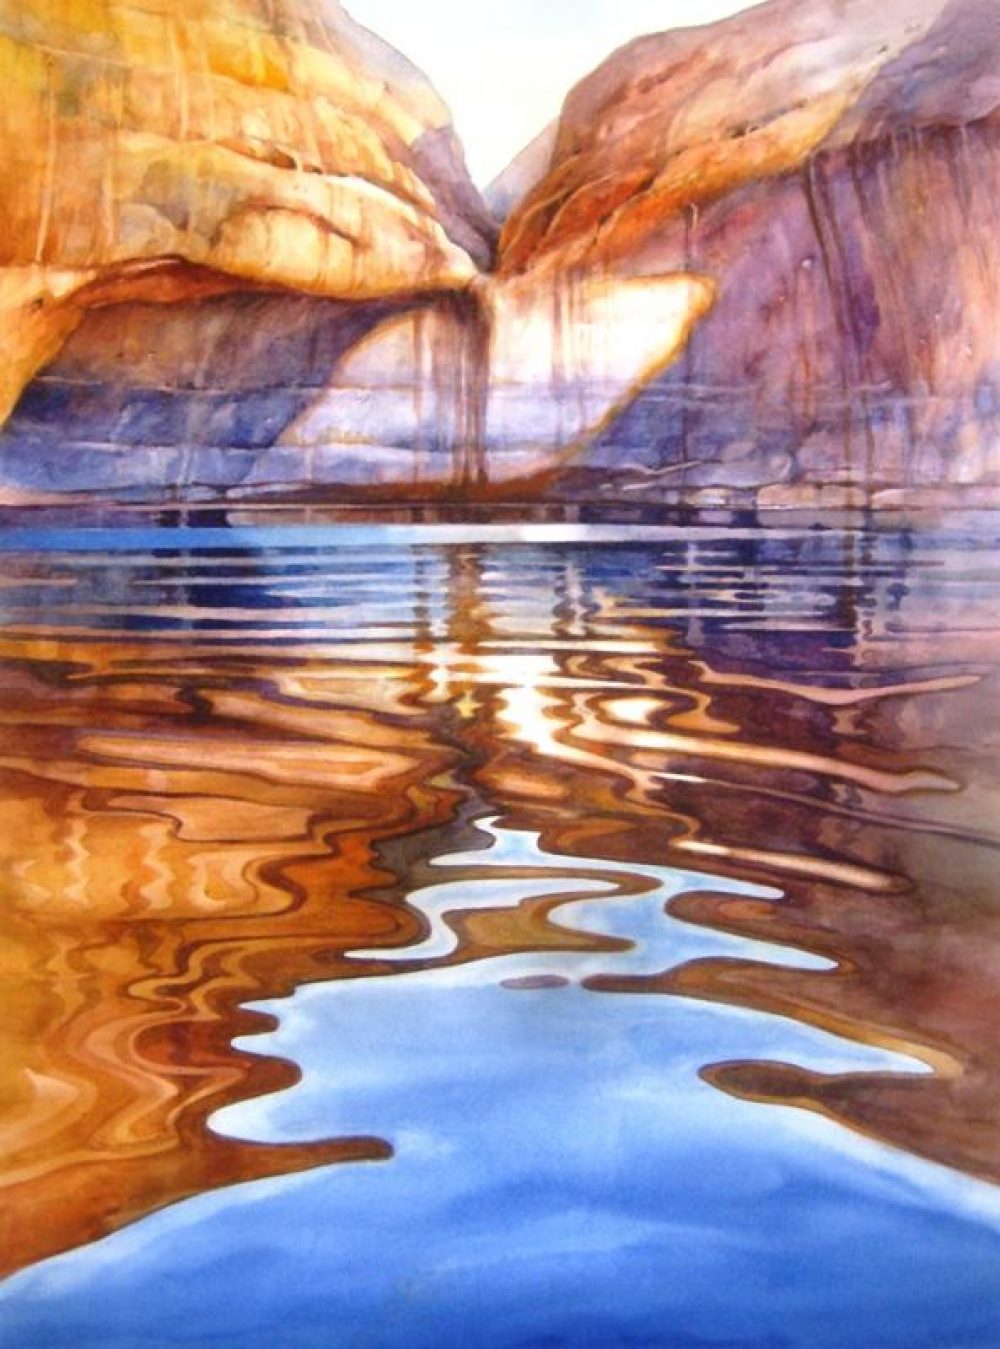 Lake Powell Reflections of Solitude - Giclee Print - Giclee From original watercolor of Lake Powell